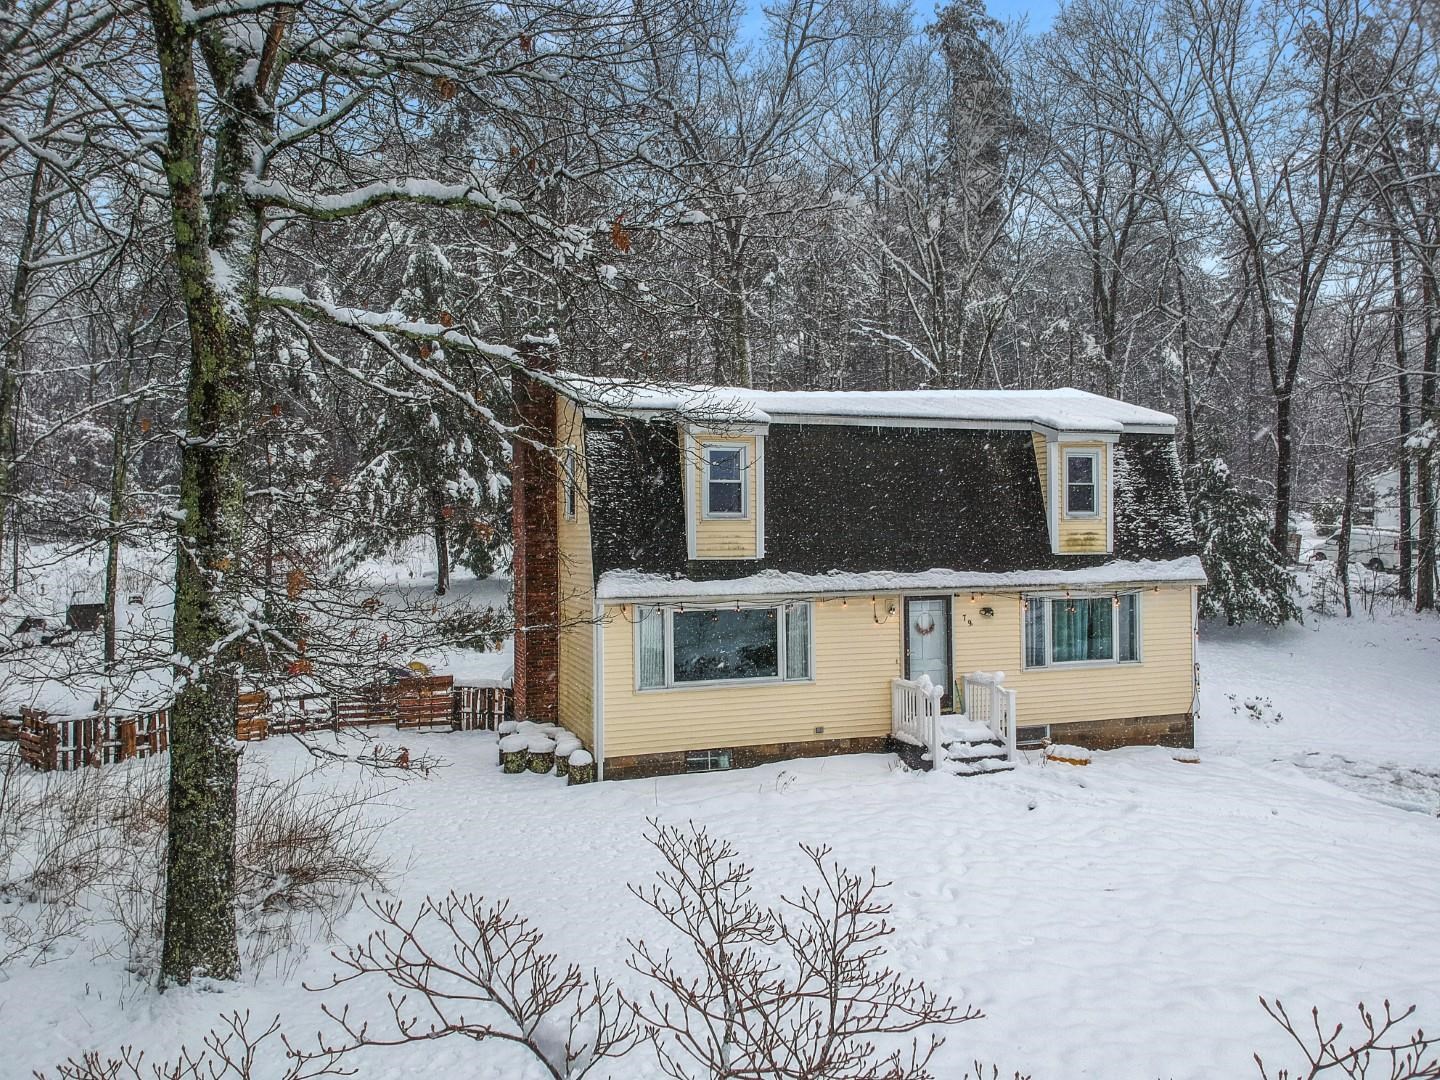 79 Old Derry Road, Londonderry, NH 03053